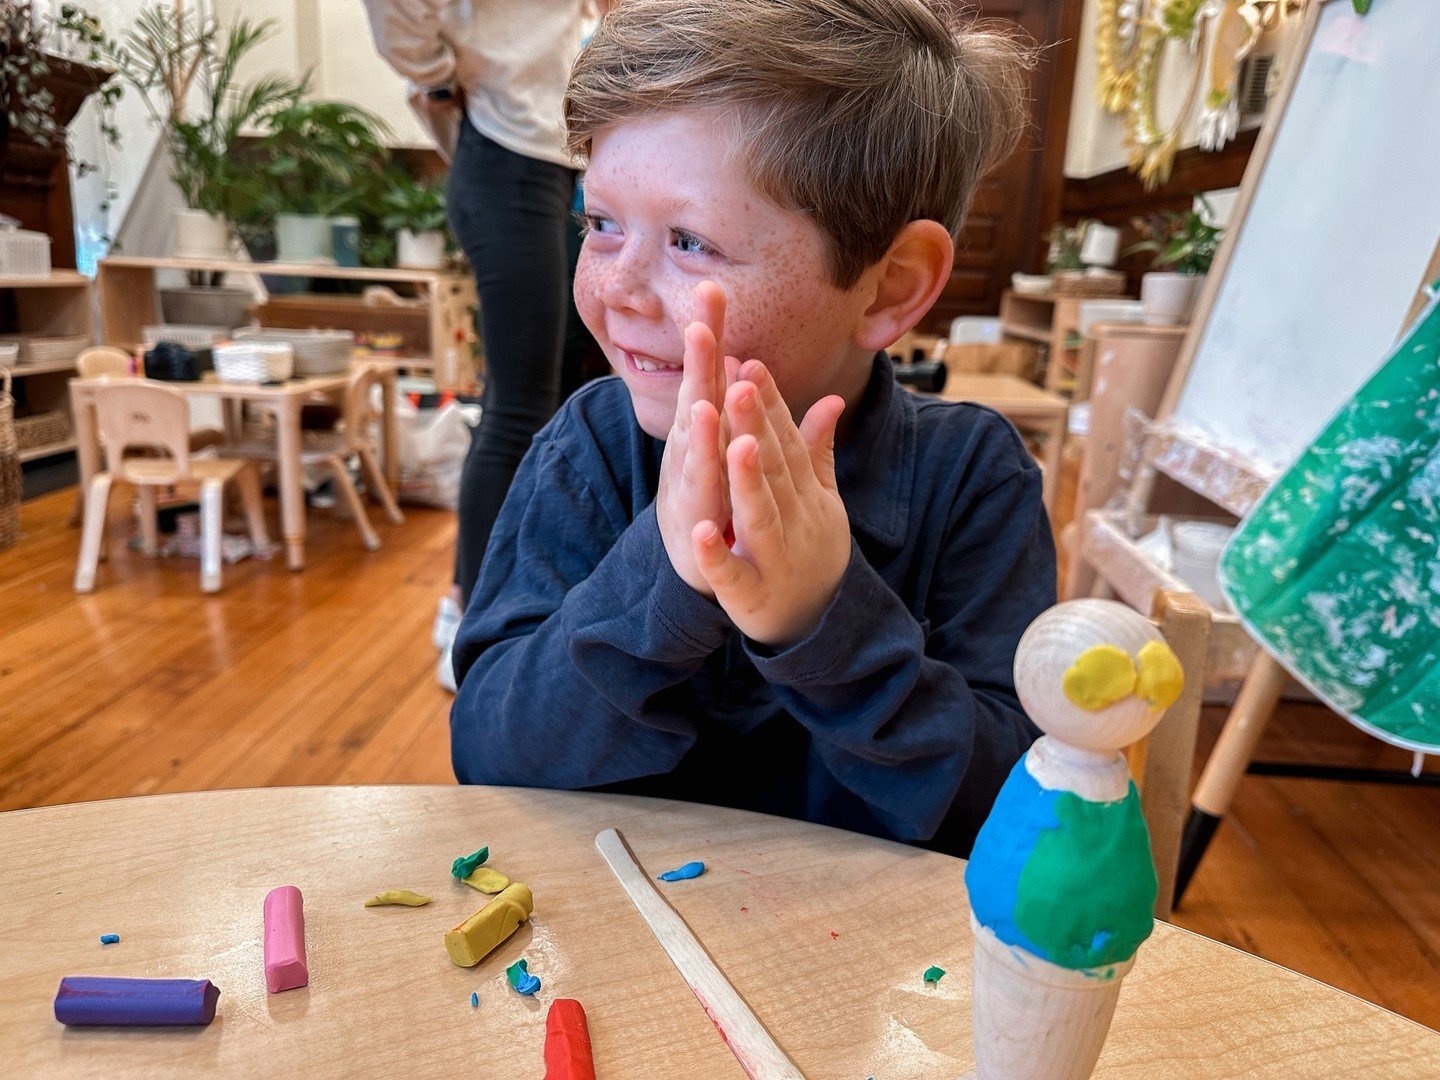 Get ready for smiles galore with every Claymates kit!⁠
⁠
But here's the best part&mdash;your child won't be the only one grinning from ear to ear. As a parent, you'll be smiling too, knowing that your little one is diving into hands-on, educational, 